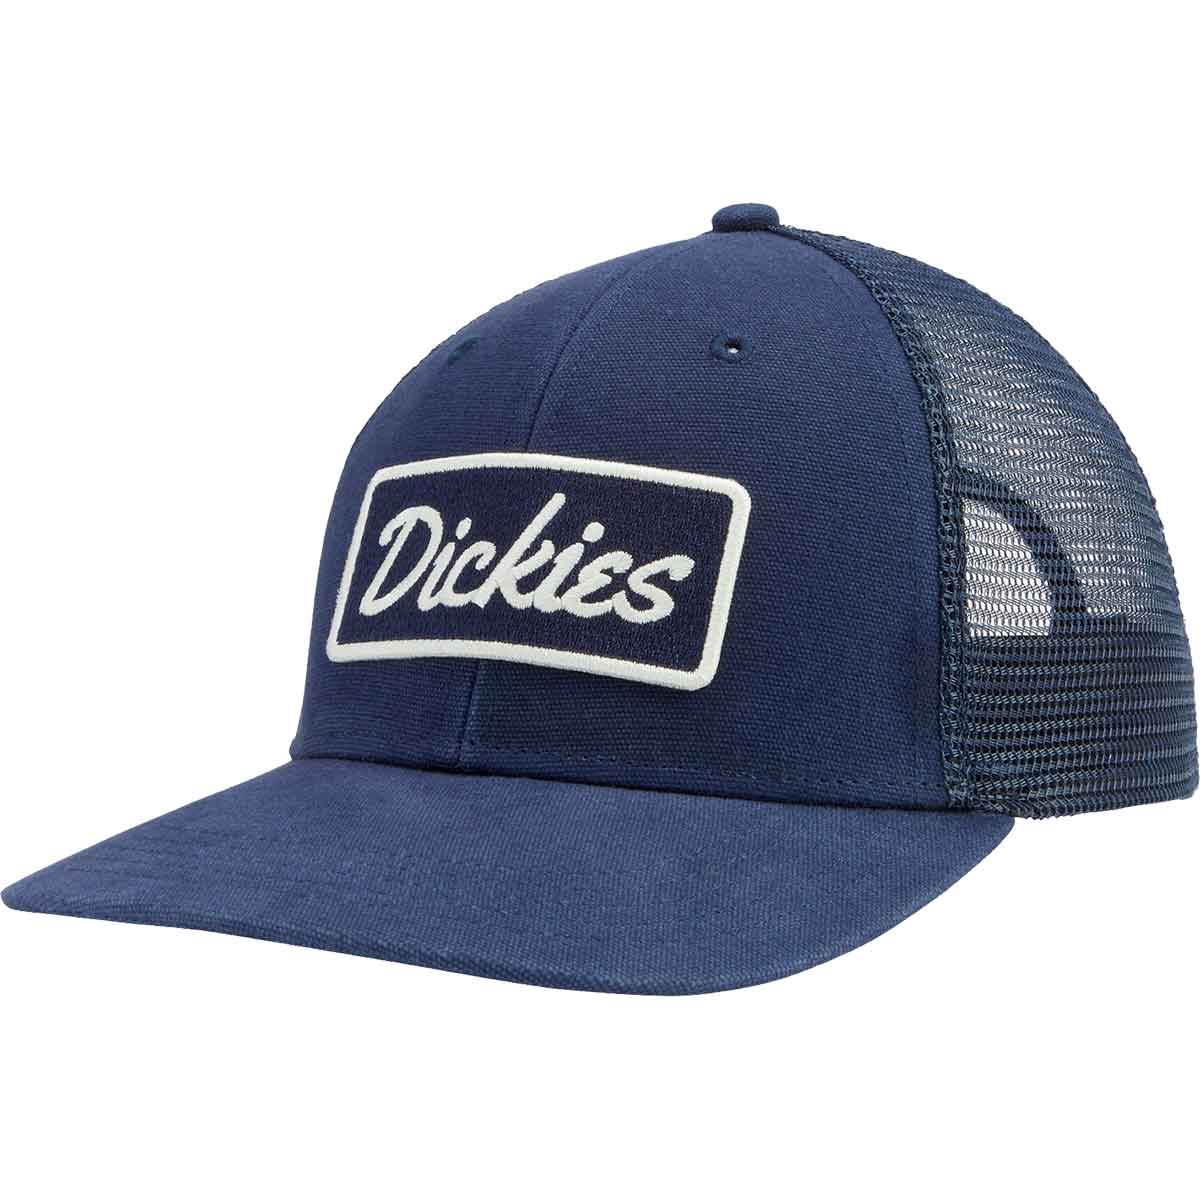 Dickies Embroidered Patch Logo Mesh Trucker Hat - Ink Navy | SoCal ...